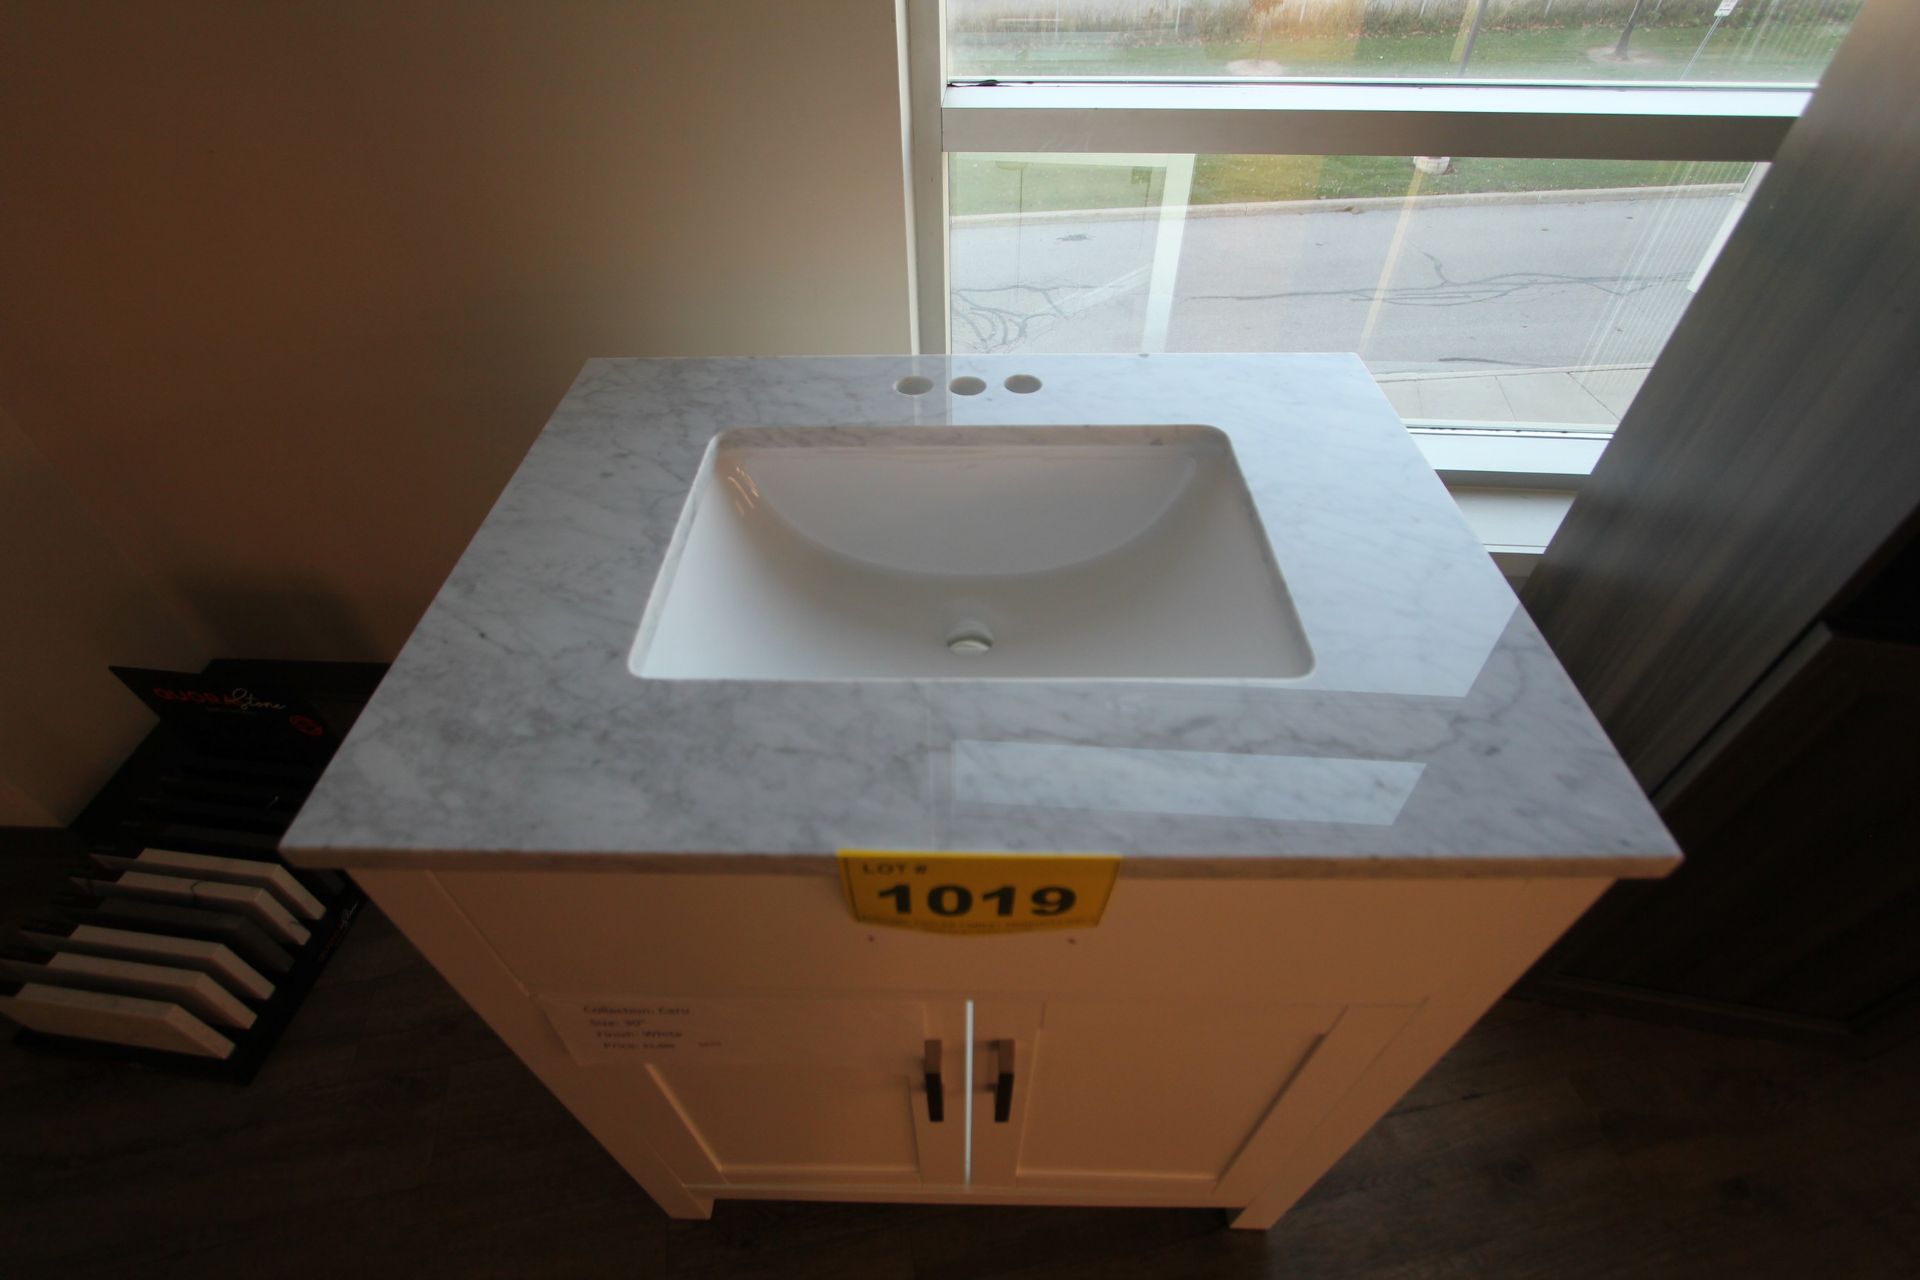 SHOWROOM DISPLAY BATHROOM VANITY W/ SINK, CUPBOARDS, CARU COLLECTION, 30", WHITE FINISH, $649 RETAIL - Image 3 of 3